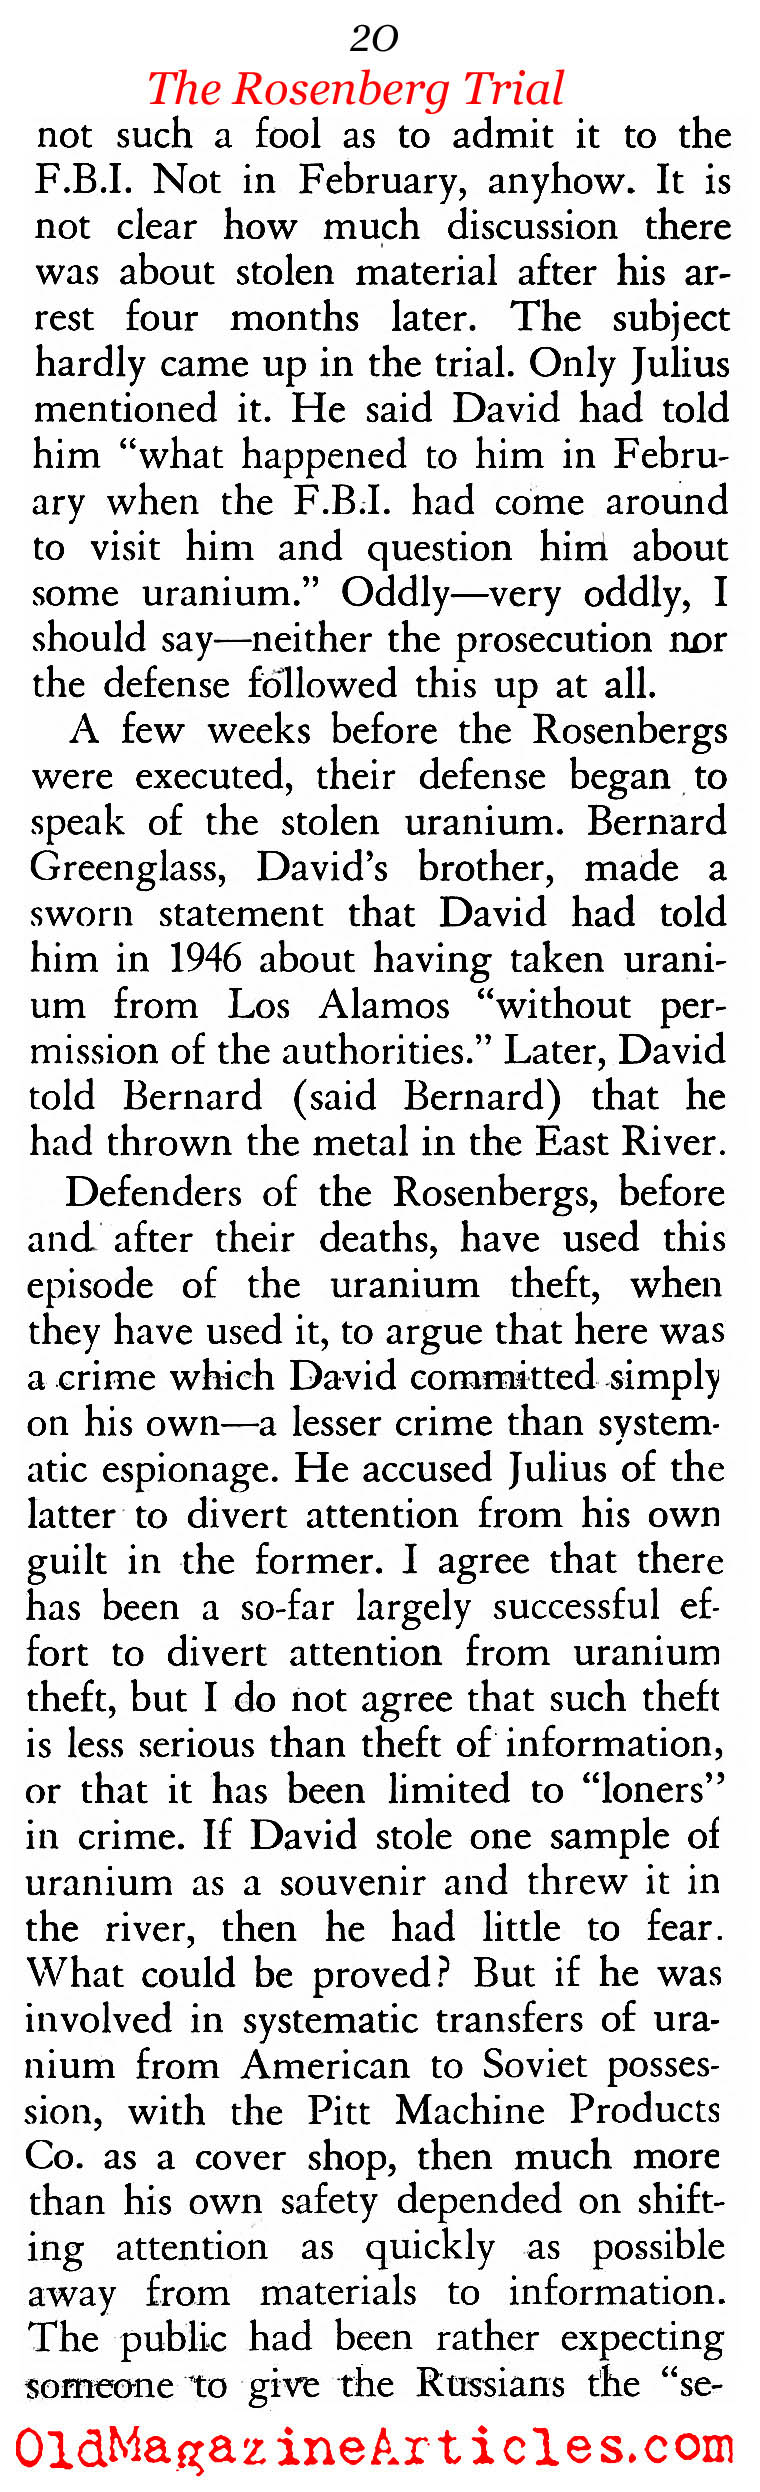 A Second Look At The Rosenberg Trial (American Opinion, 1966, 1967)